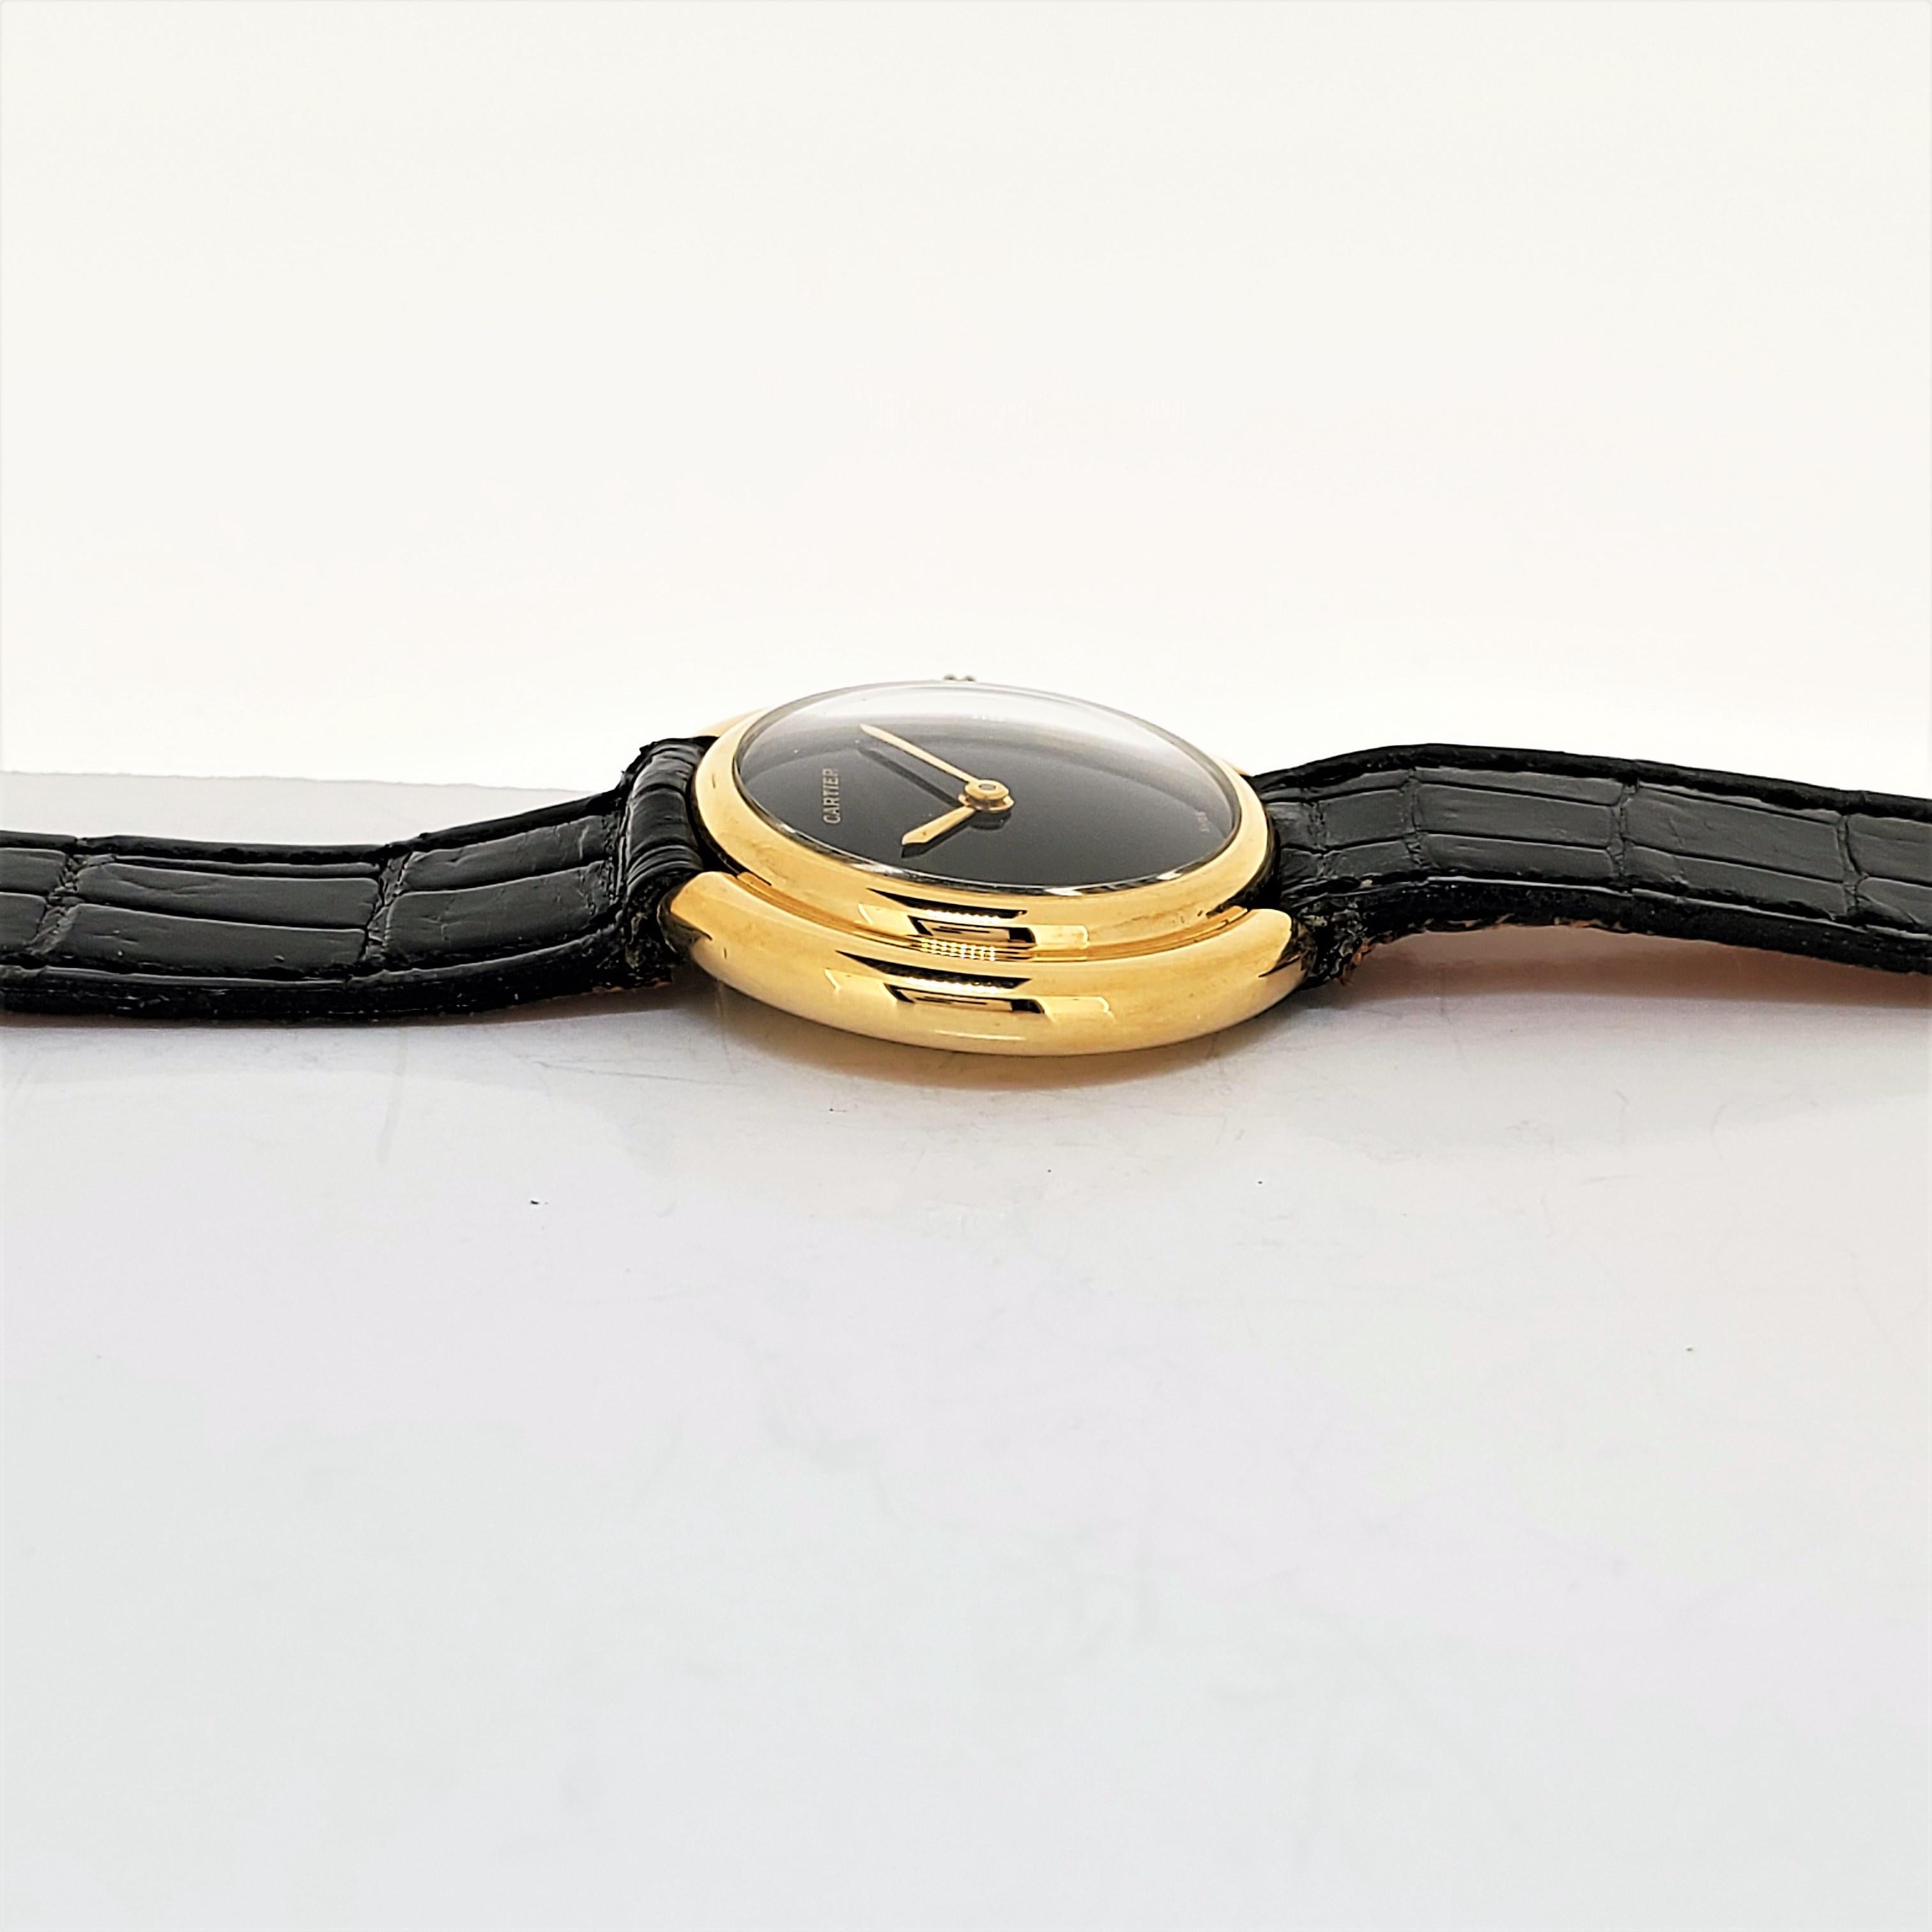 Vintage Cartier Paris Vendome Small Watch manual wind. Choice of Black or Roman  For Sale 3